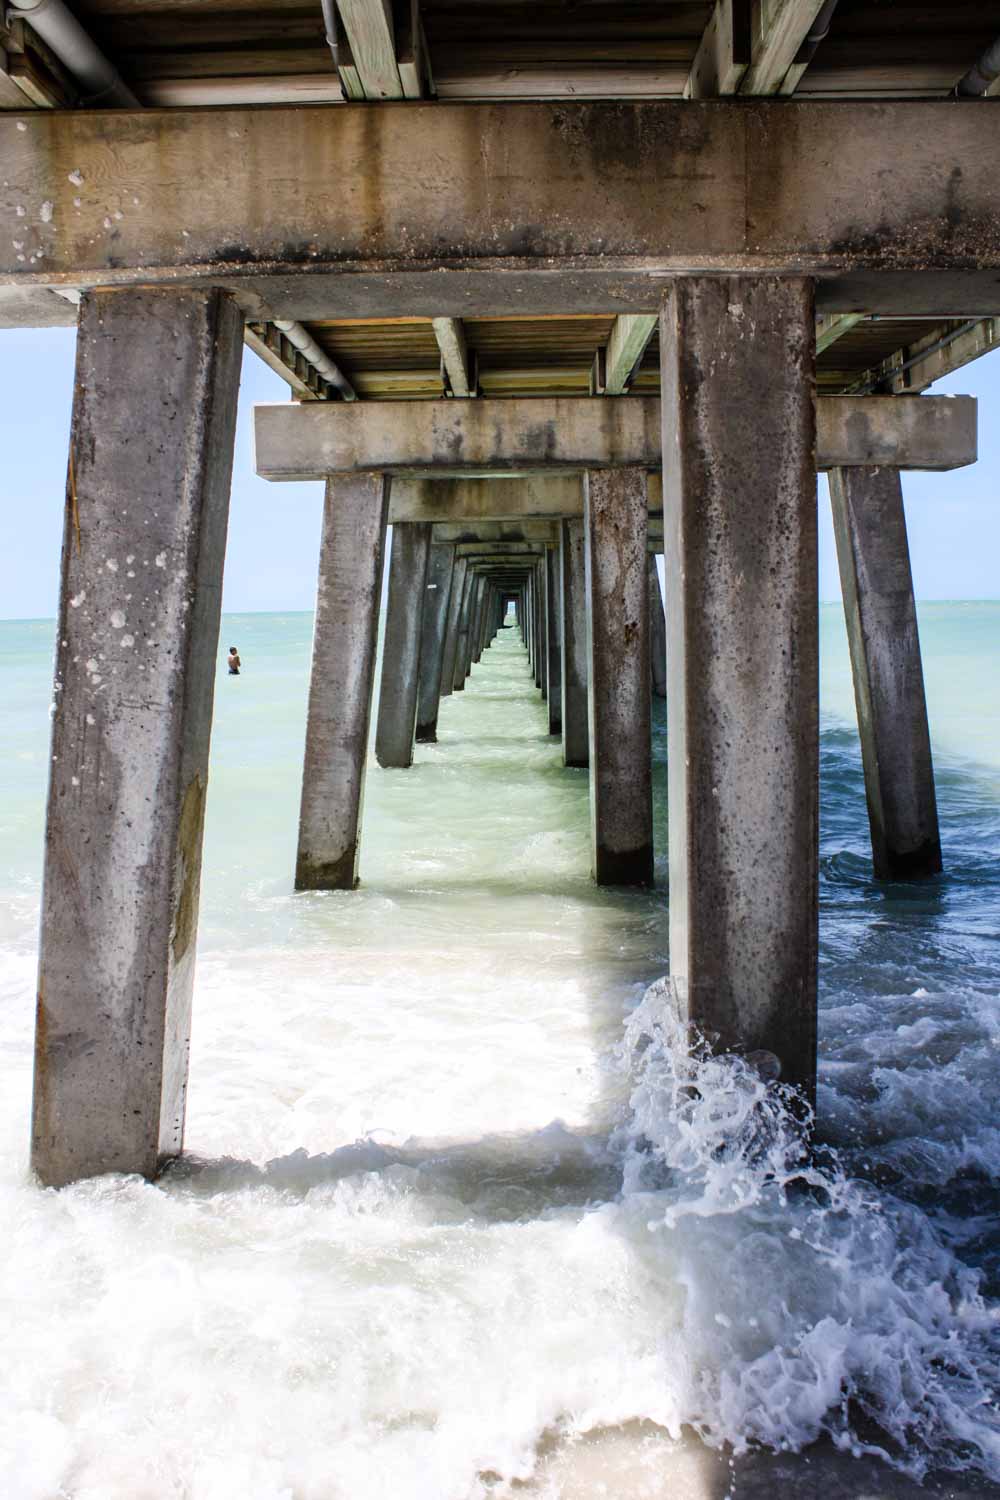 The view from underneath the Naples Fishing Pier in Naples, Florida